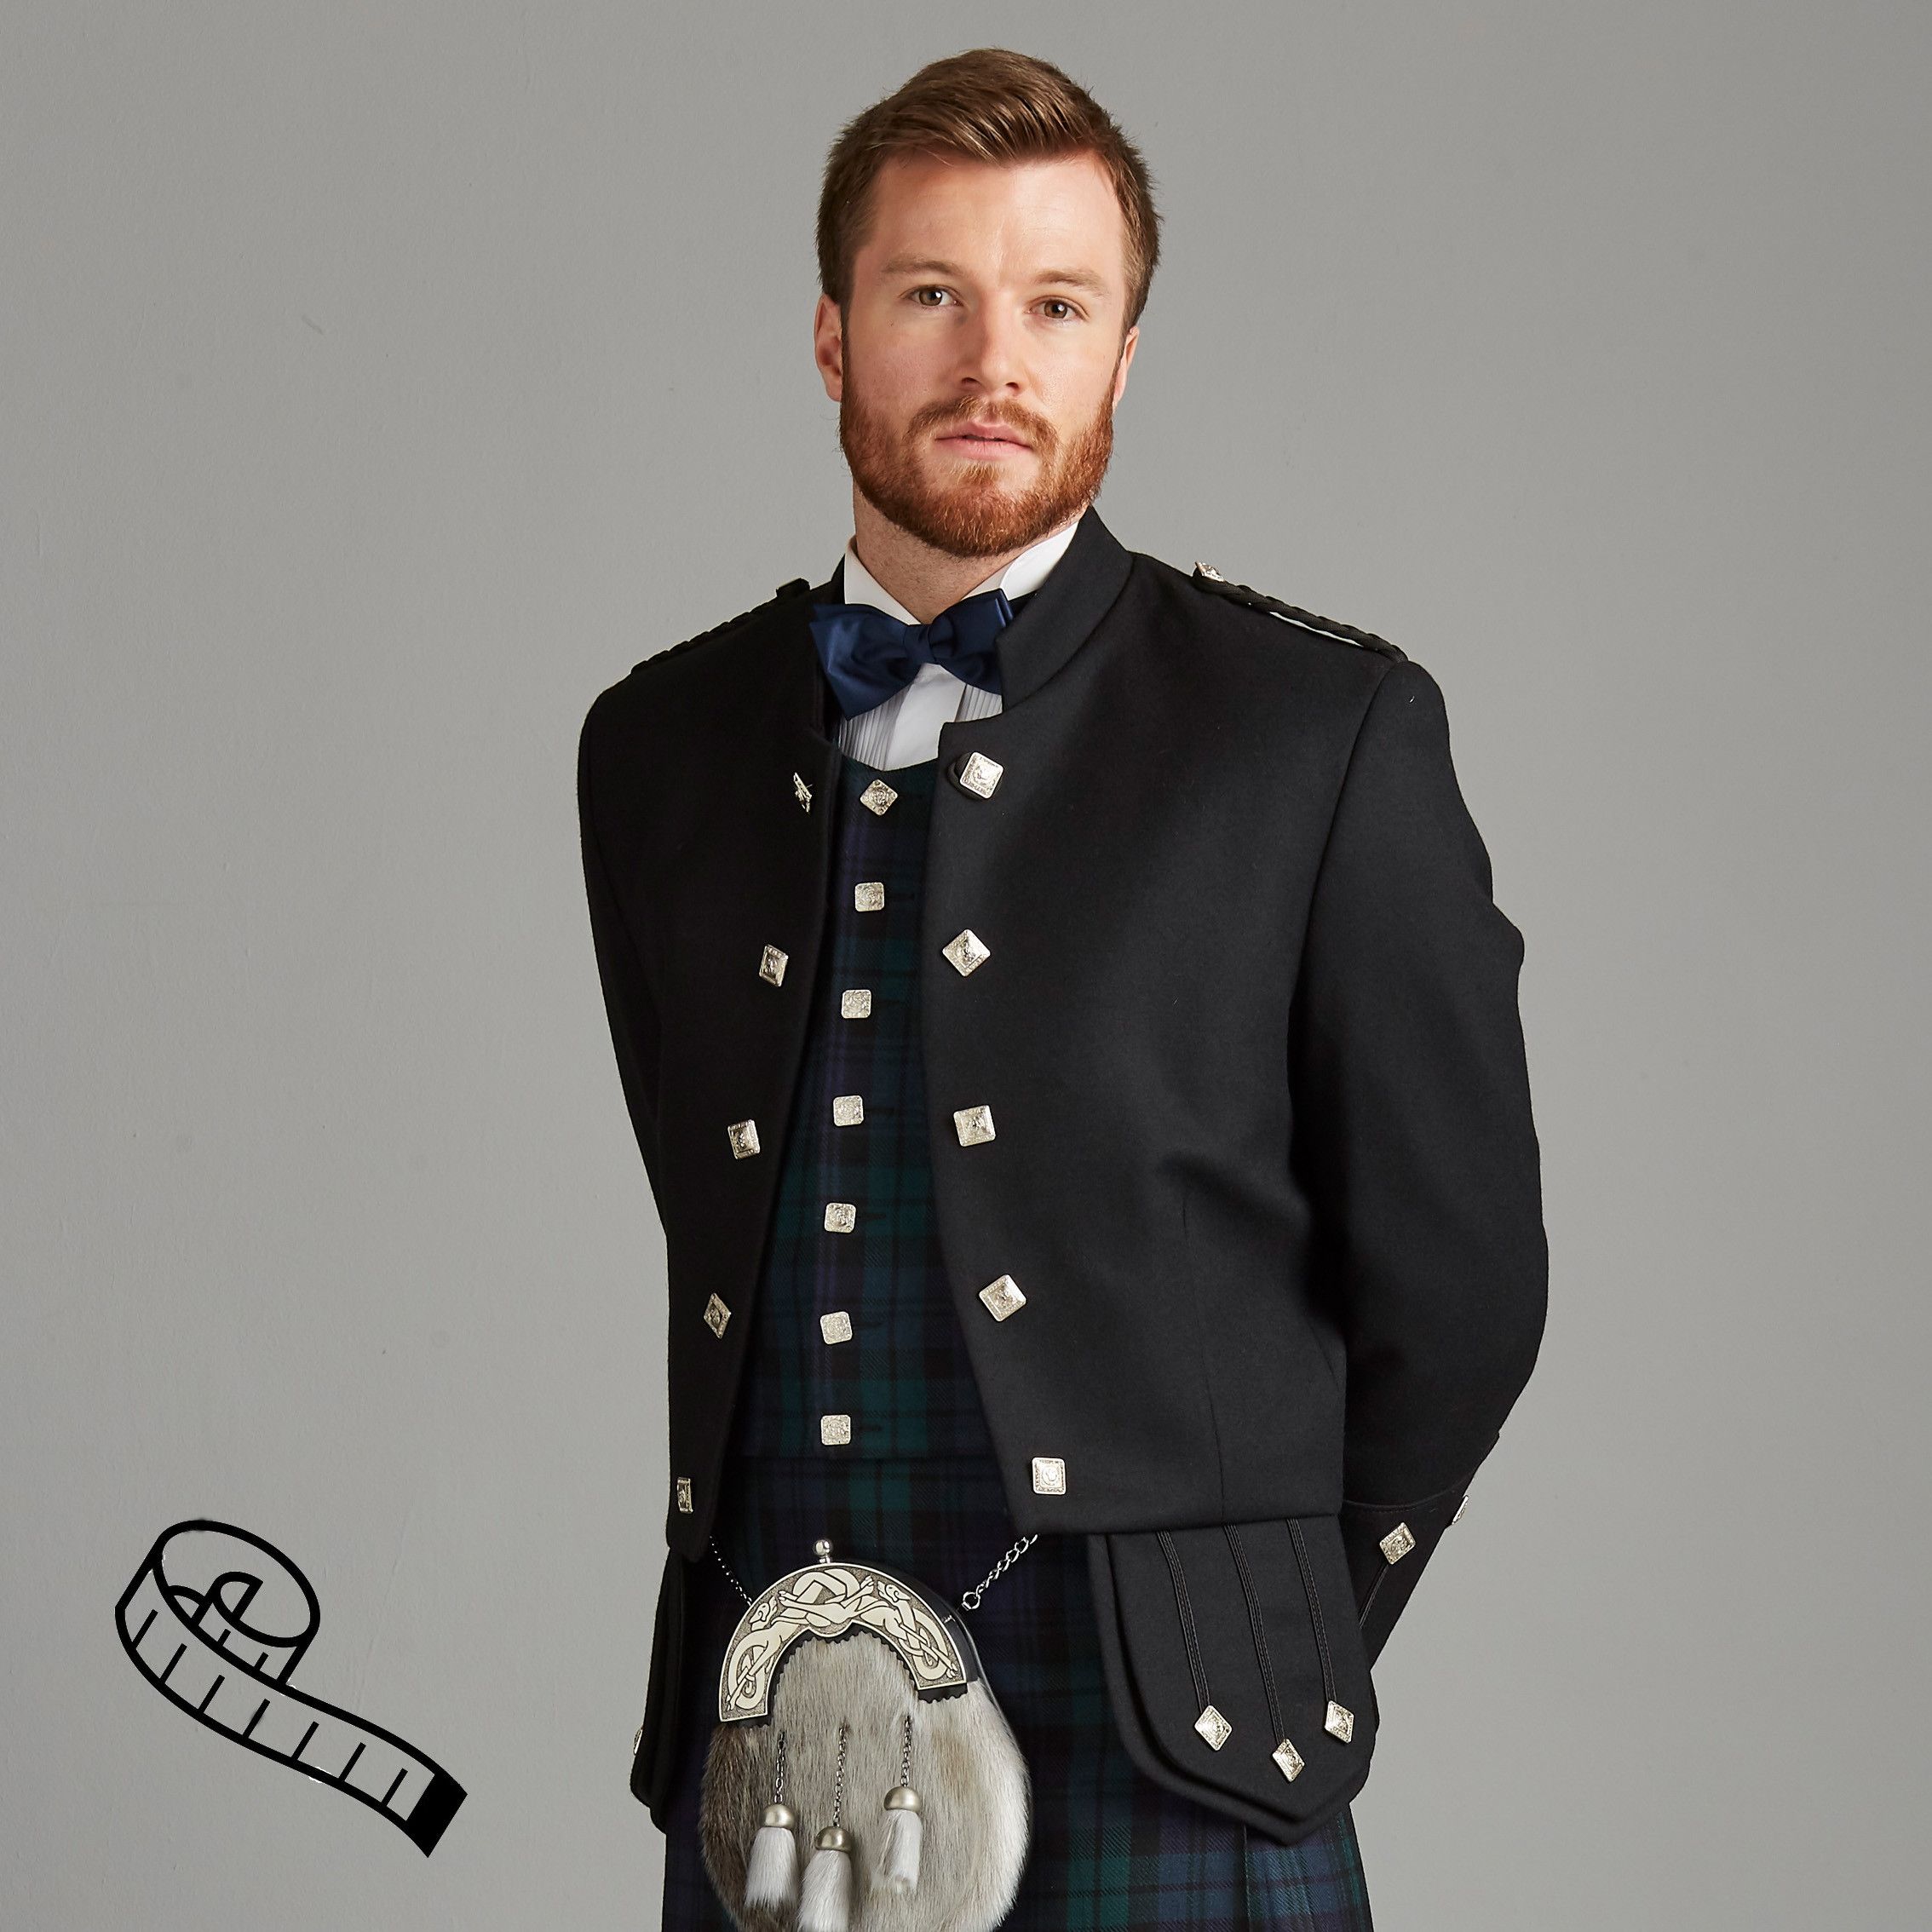 Sheriffmuir Doublet in Black Barathea Made to Order